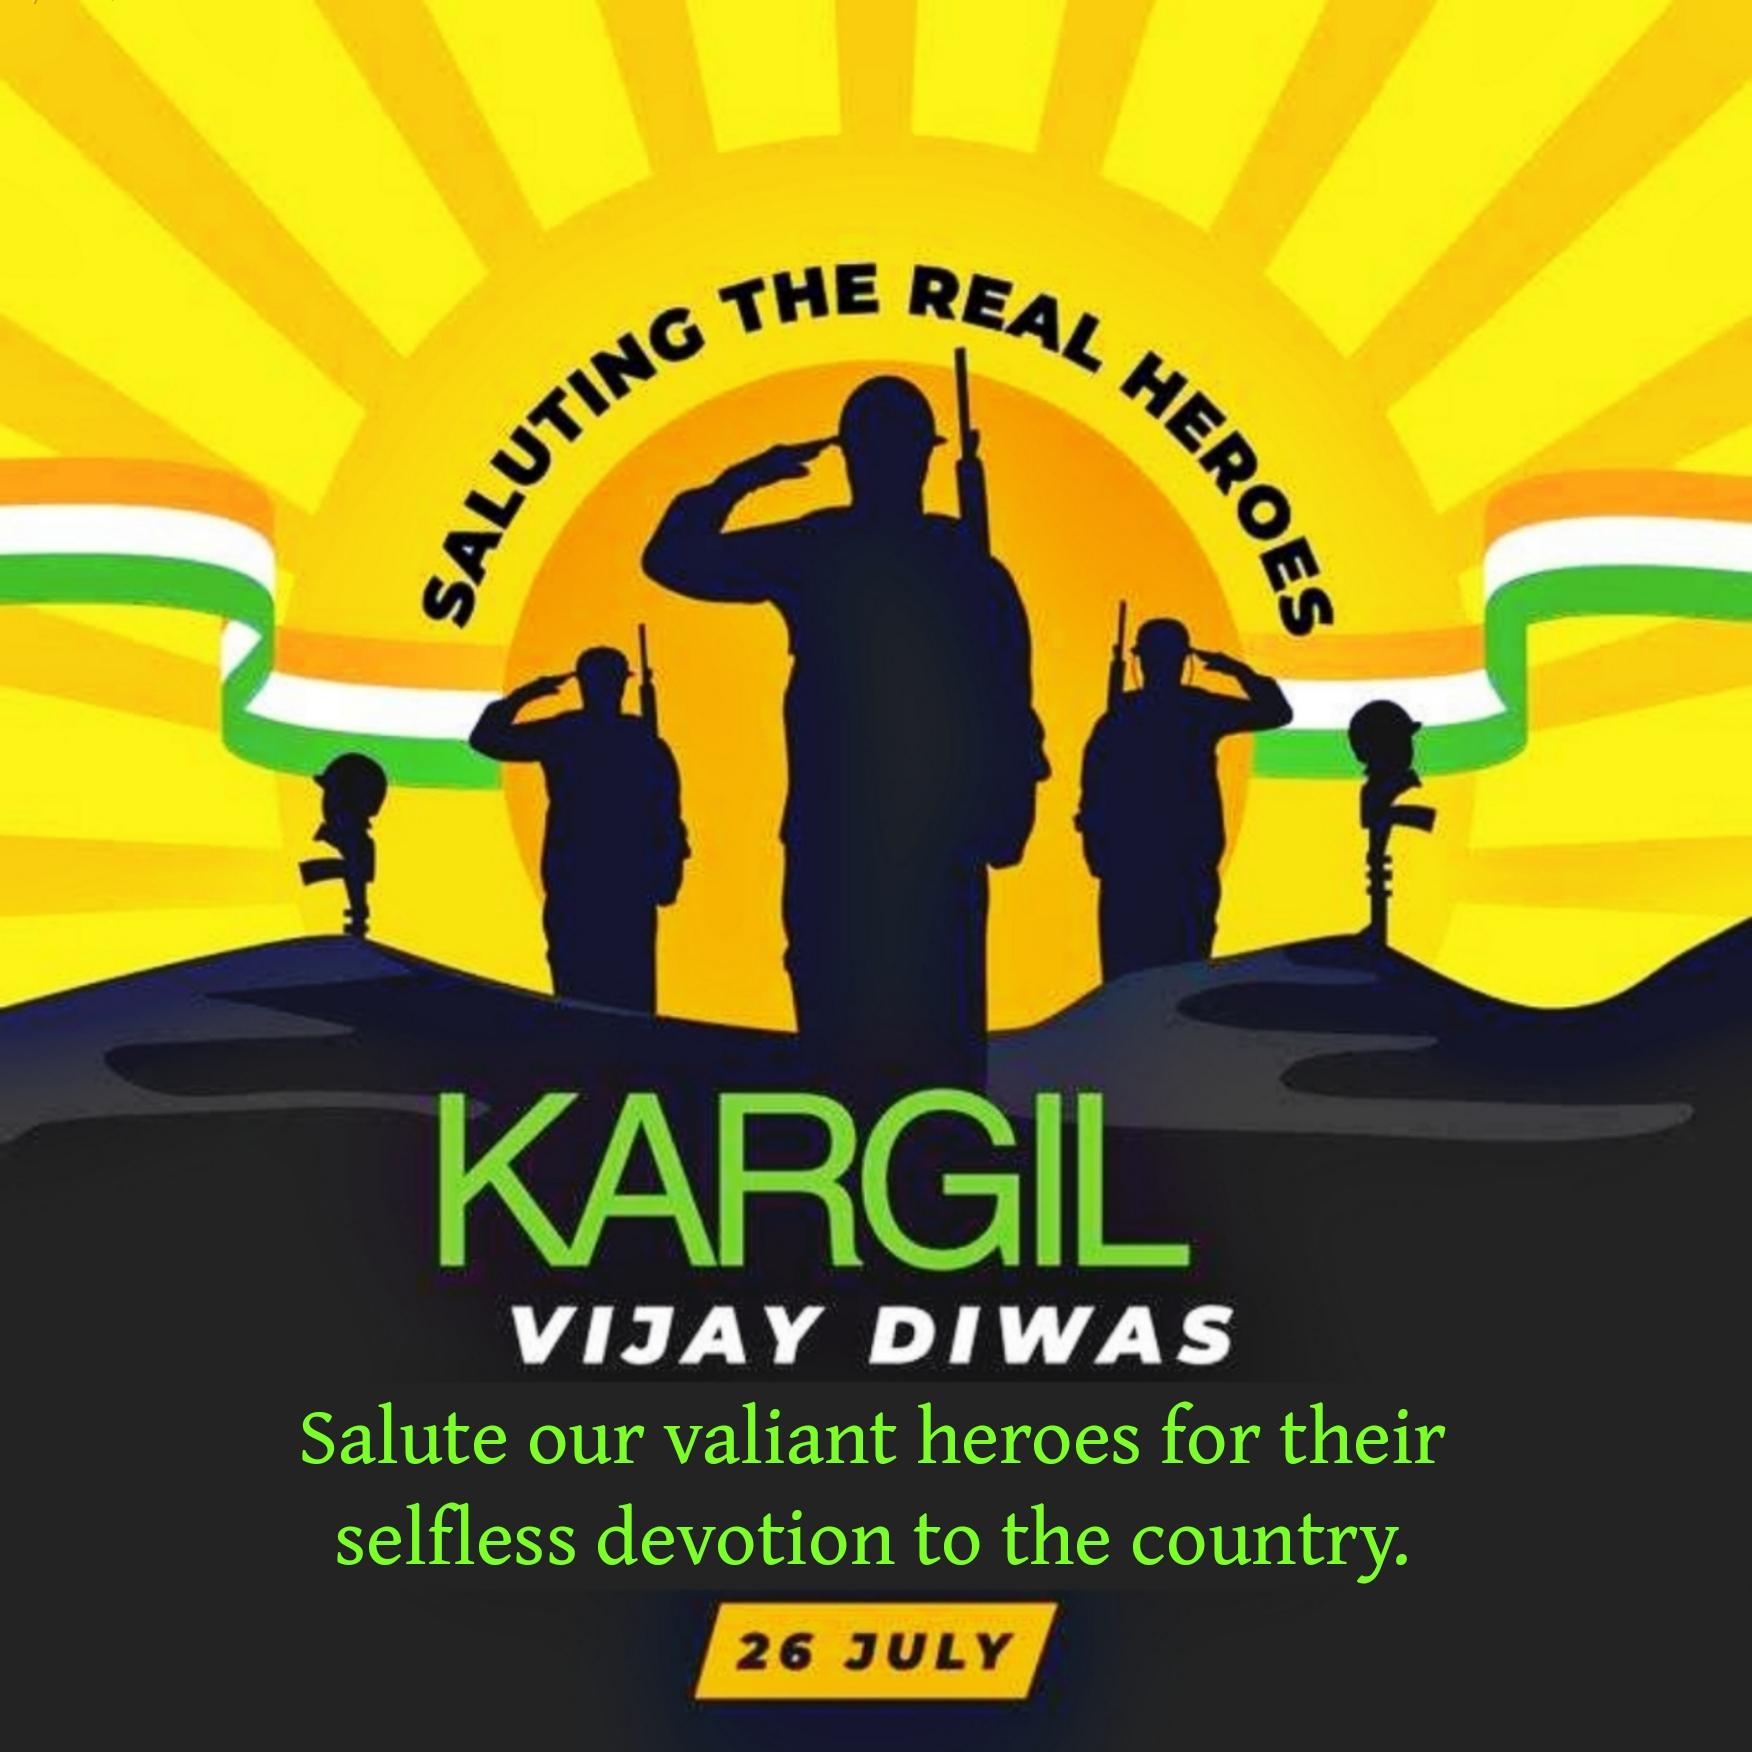 Salute our valiant heroes for their selfless devotion to the country